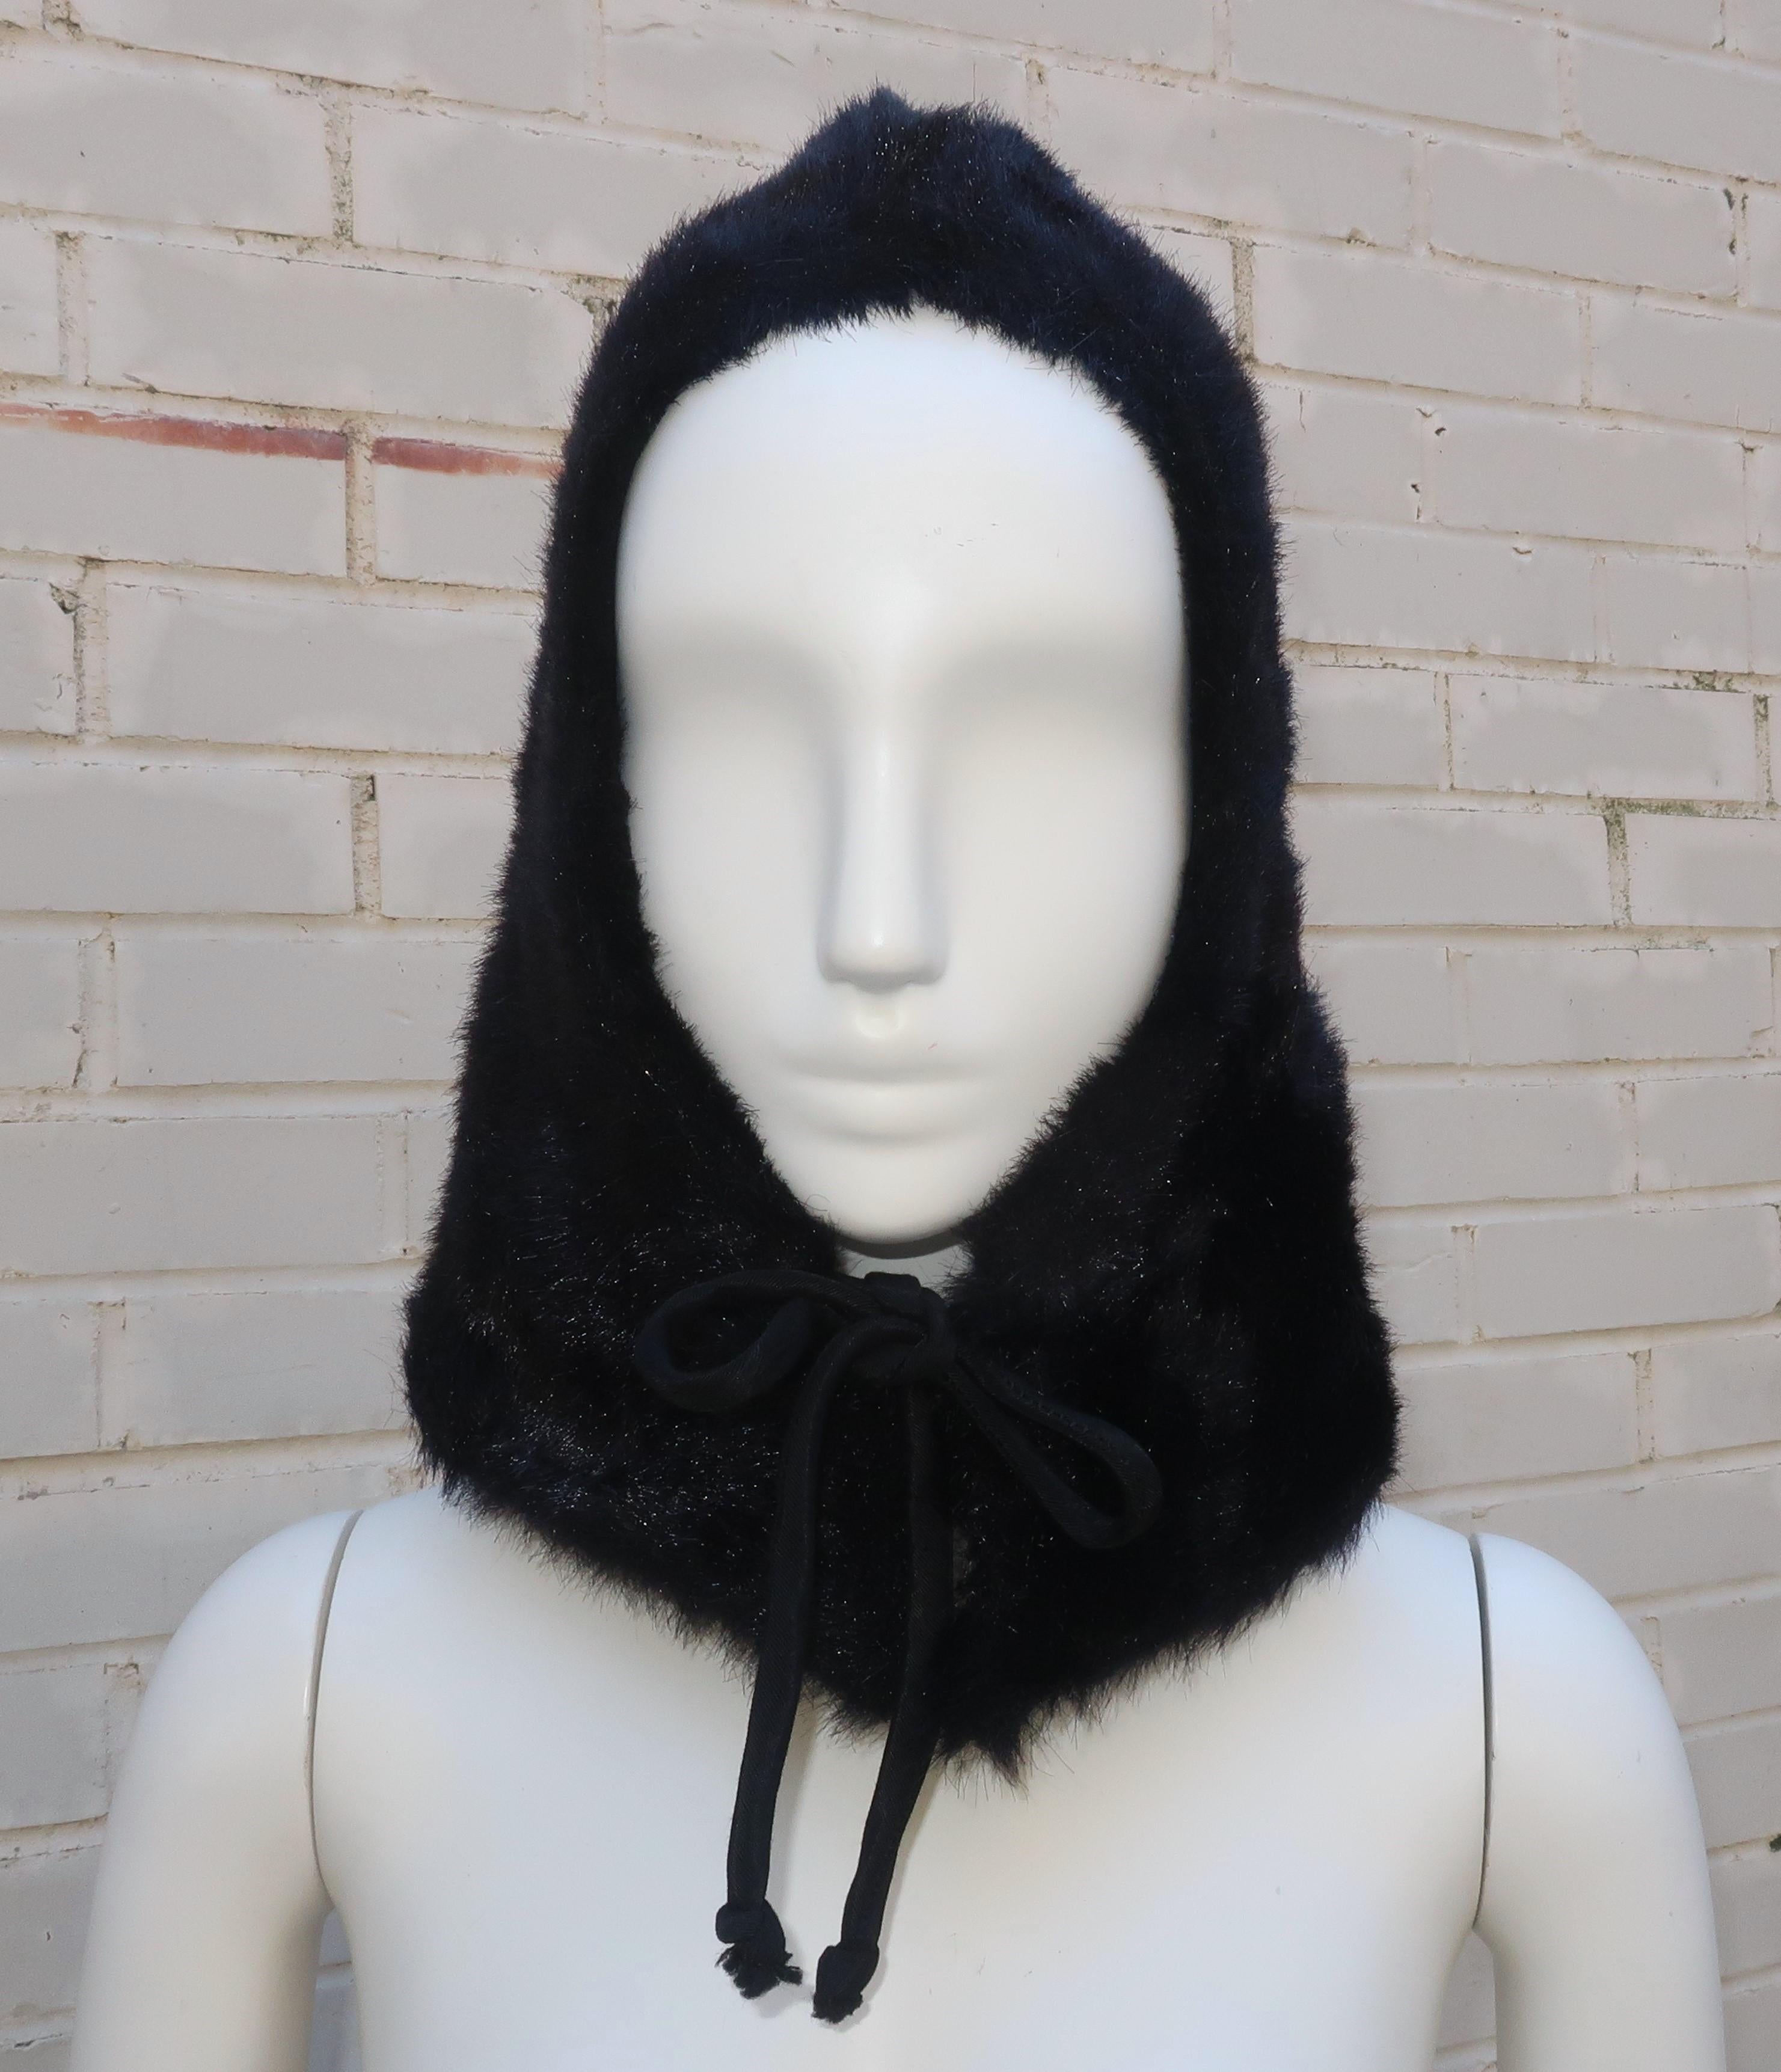 Mod 1960's black faux fur hood with silk faille ties at the front.  The fabulous faux look is actually an easy-to-care-for acrylic that is soft to the touch and drapes easily.  The hood effectively covers the head, ears and neck making it a